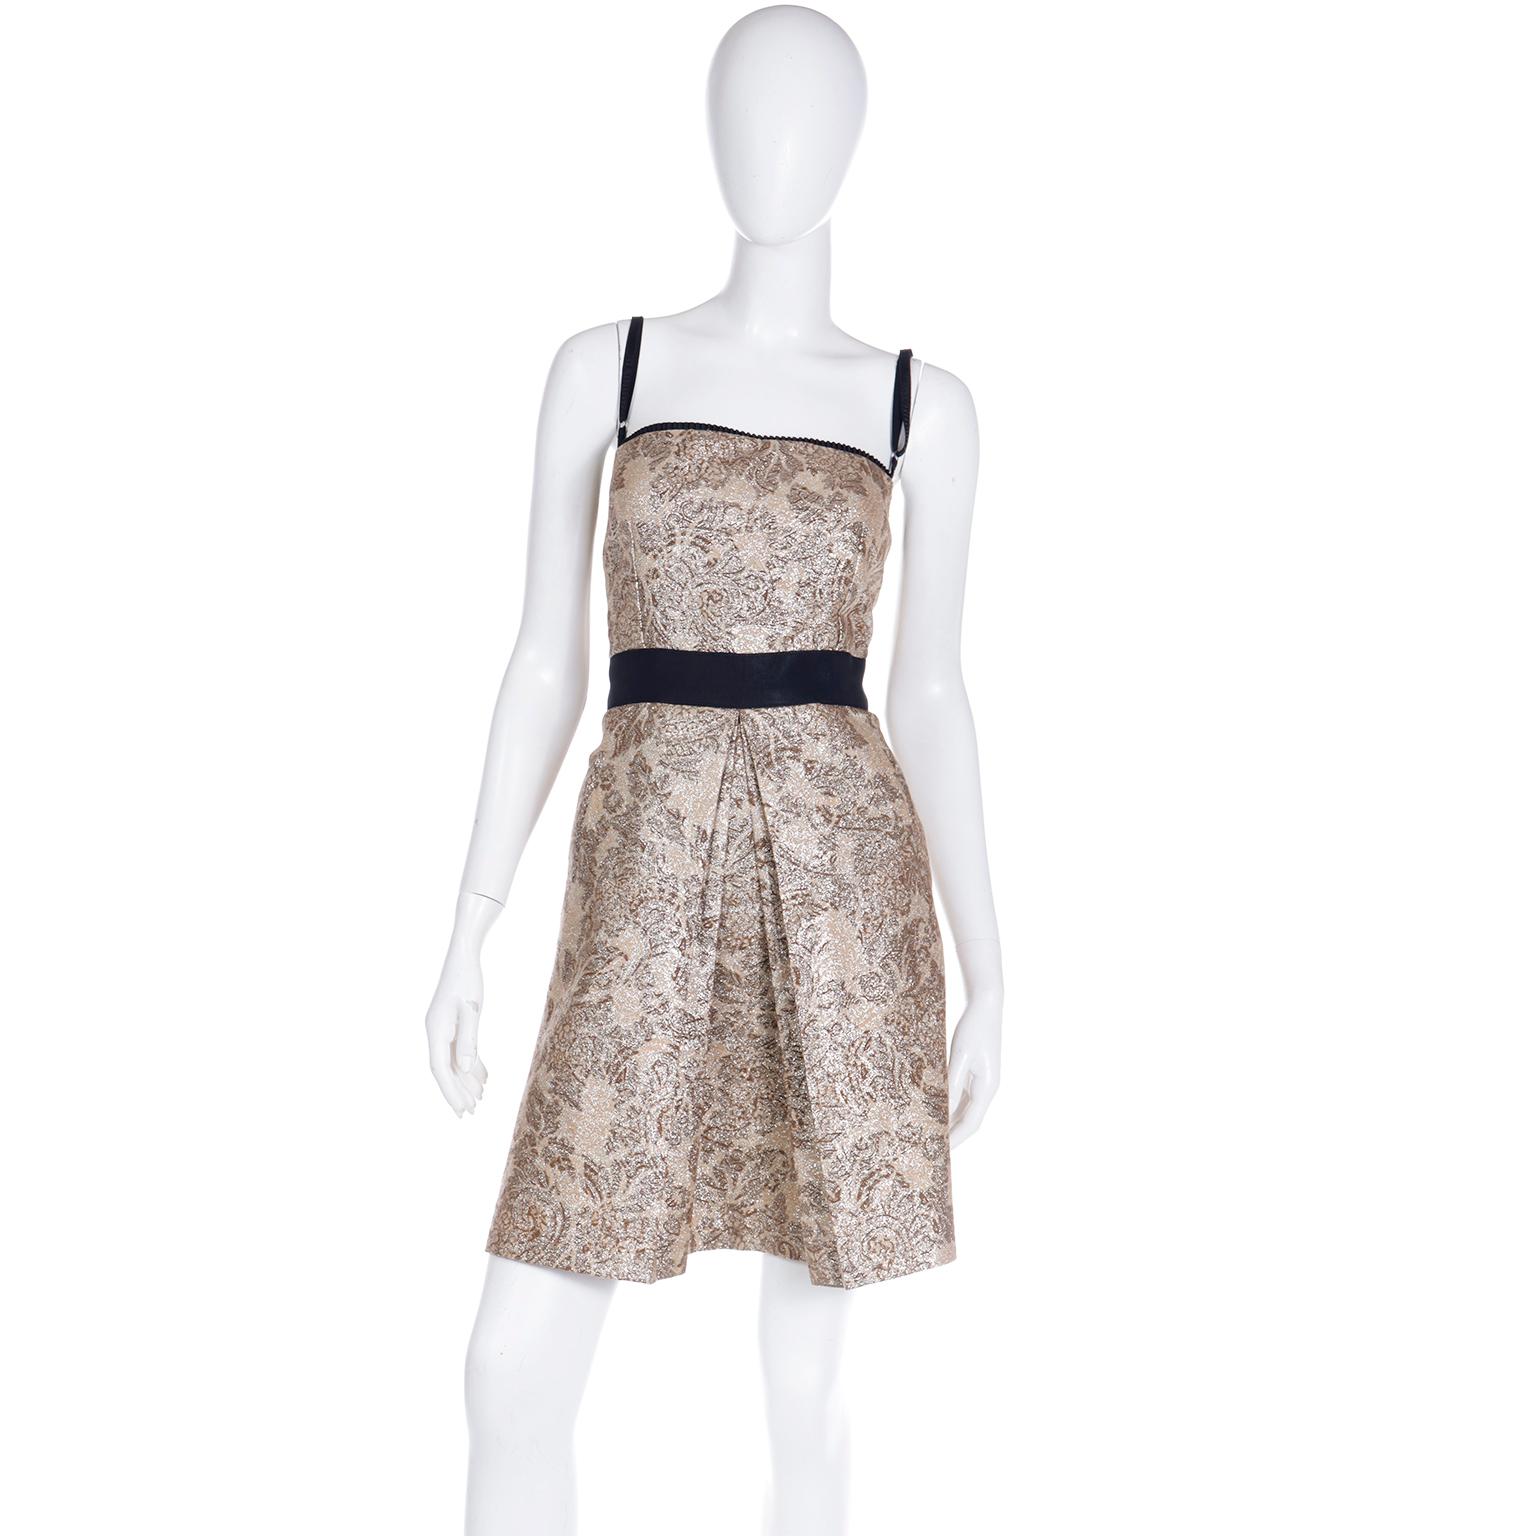 This lovely ensemble from Dolce & Gabbana includes a mini dress, coat and belt in a gold floral metallic print. The print is in subtle shades of brown and gold and the dress has black trim.  It is rare to find this outfit complete with all 3